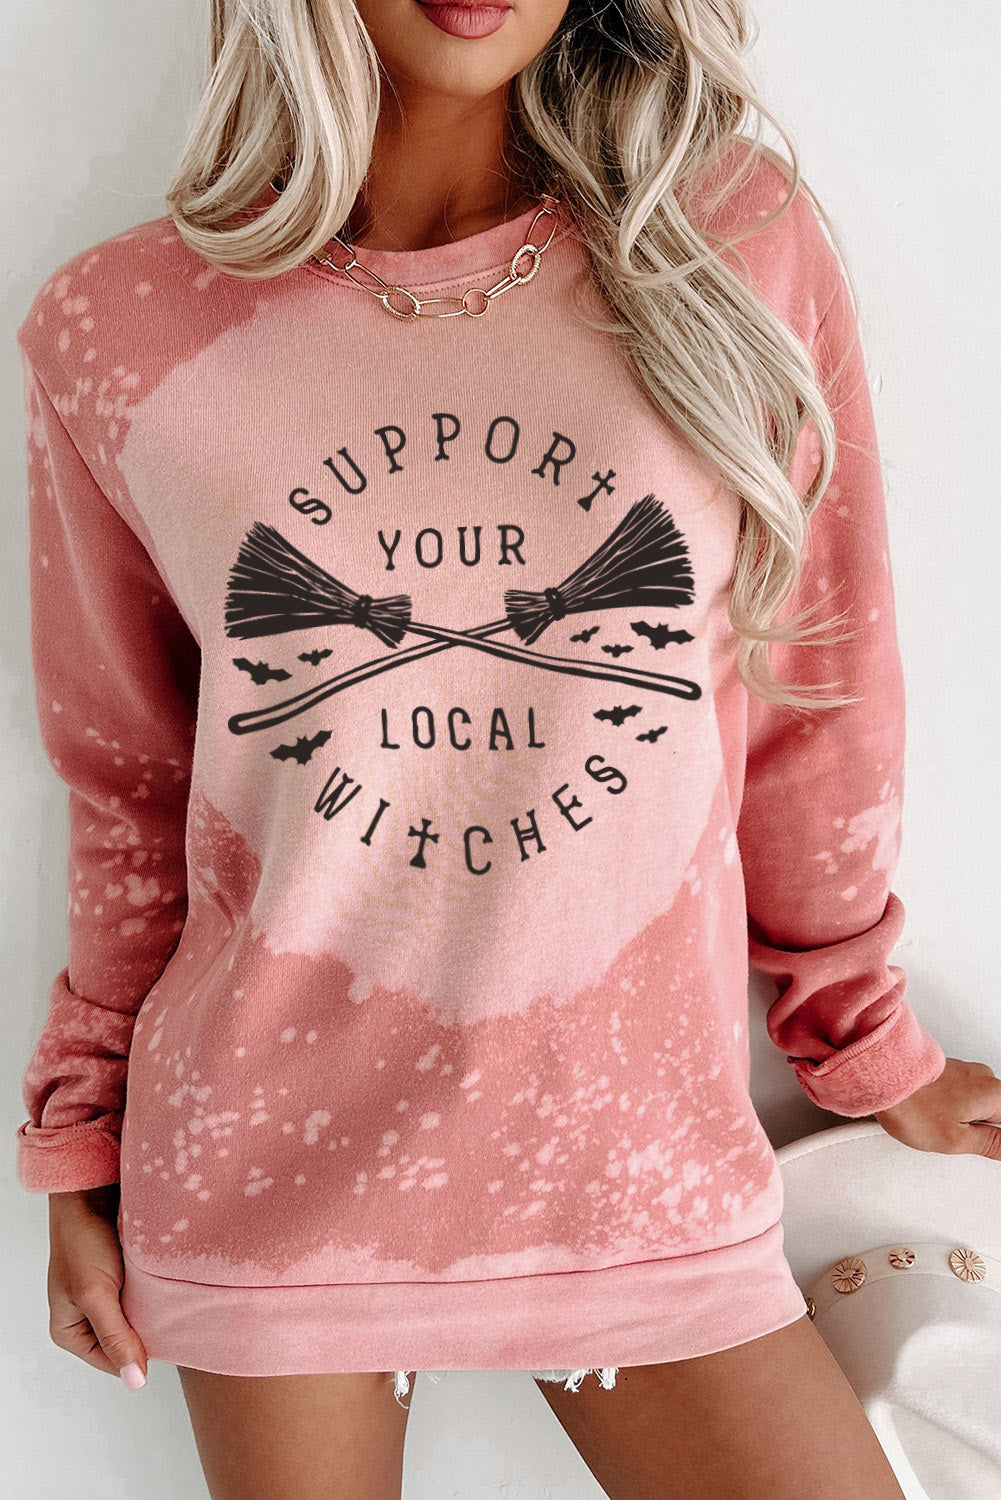 SUPPORT YOUR LOCAL WITCHES Graphic Sweatshirt - The Lakeside Boutique